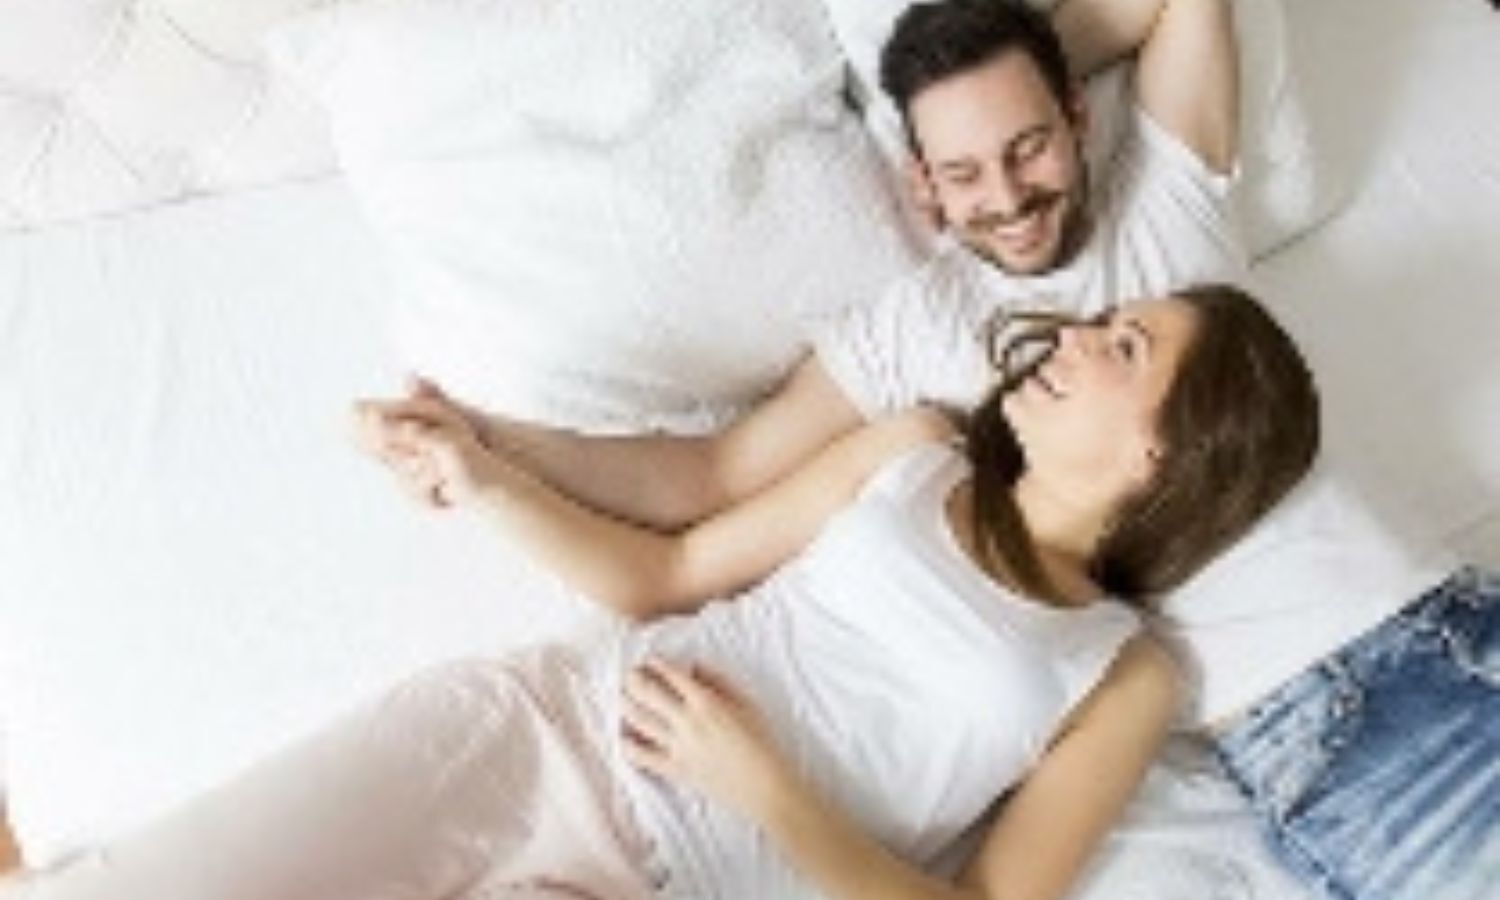 Benefits of Morning Sex: These 5 tremendous benefits of having sex in the morning